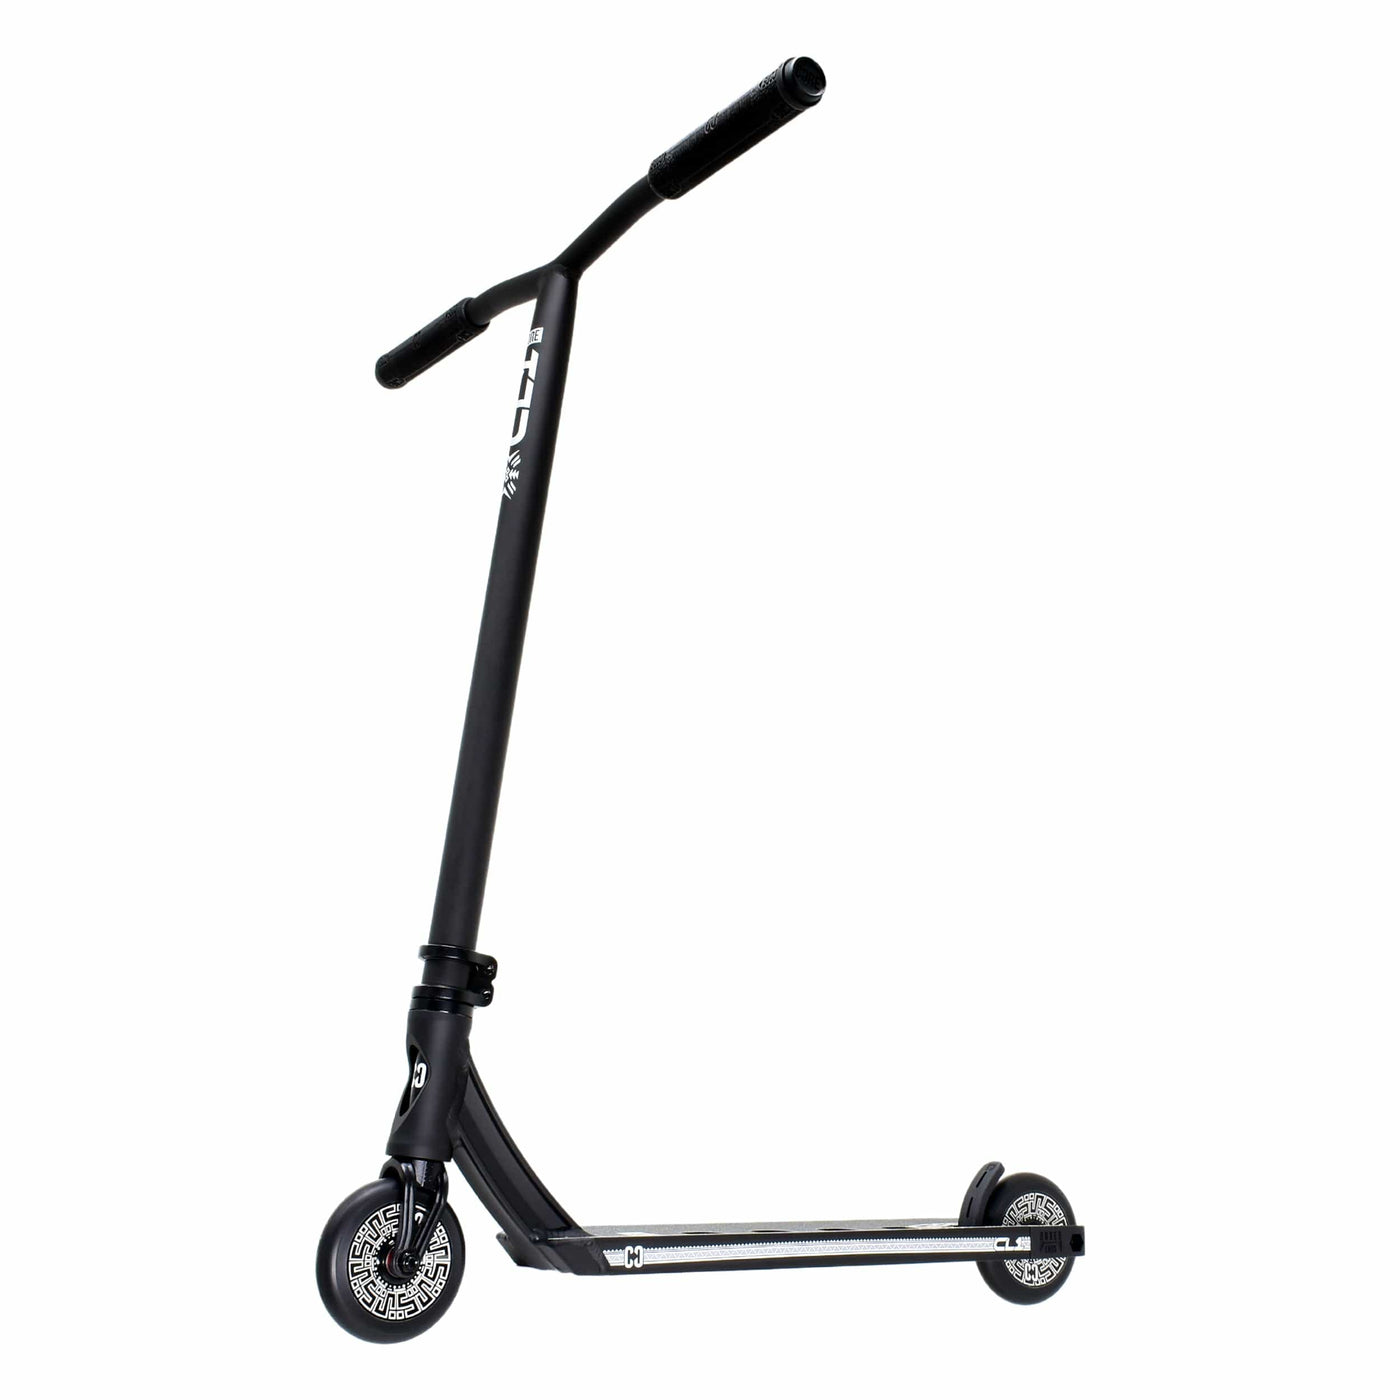 CORE CL1 Complete Stunt Scooter Black I Adult Stunt Scooter Alt Side Front View